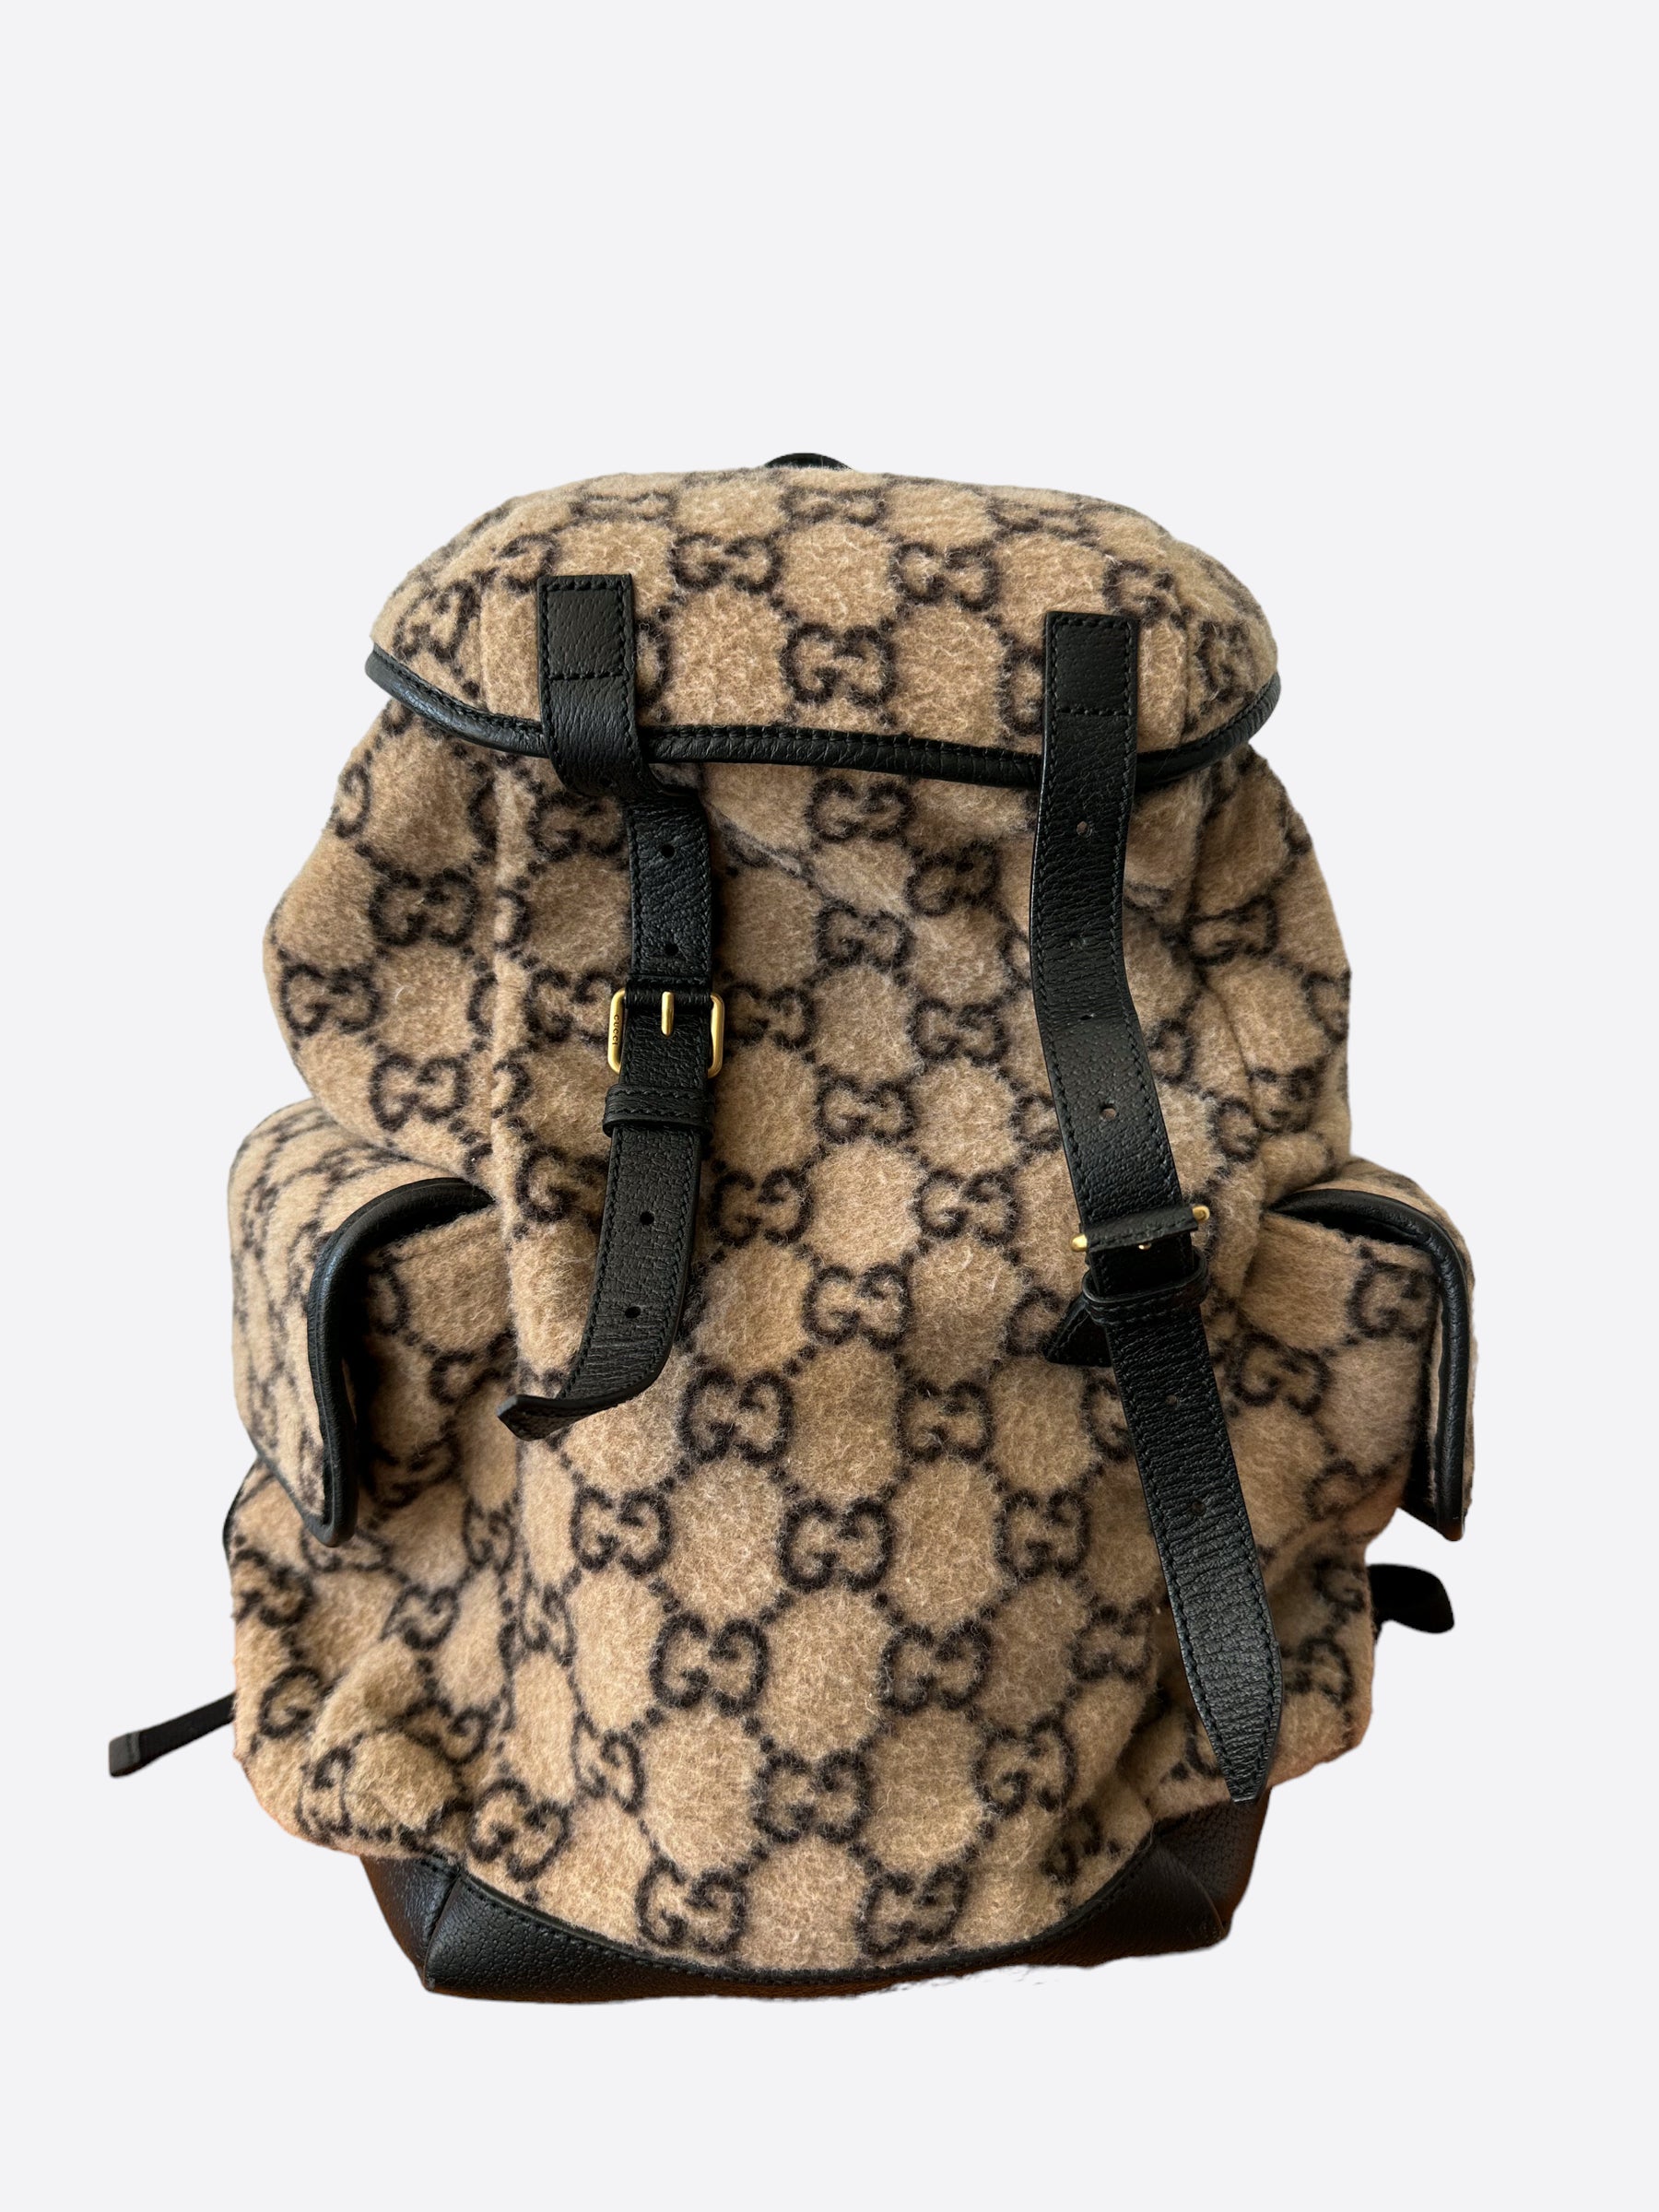 gucci backpack brown